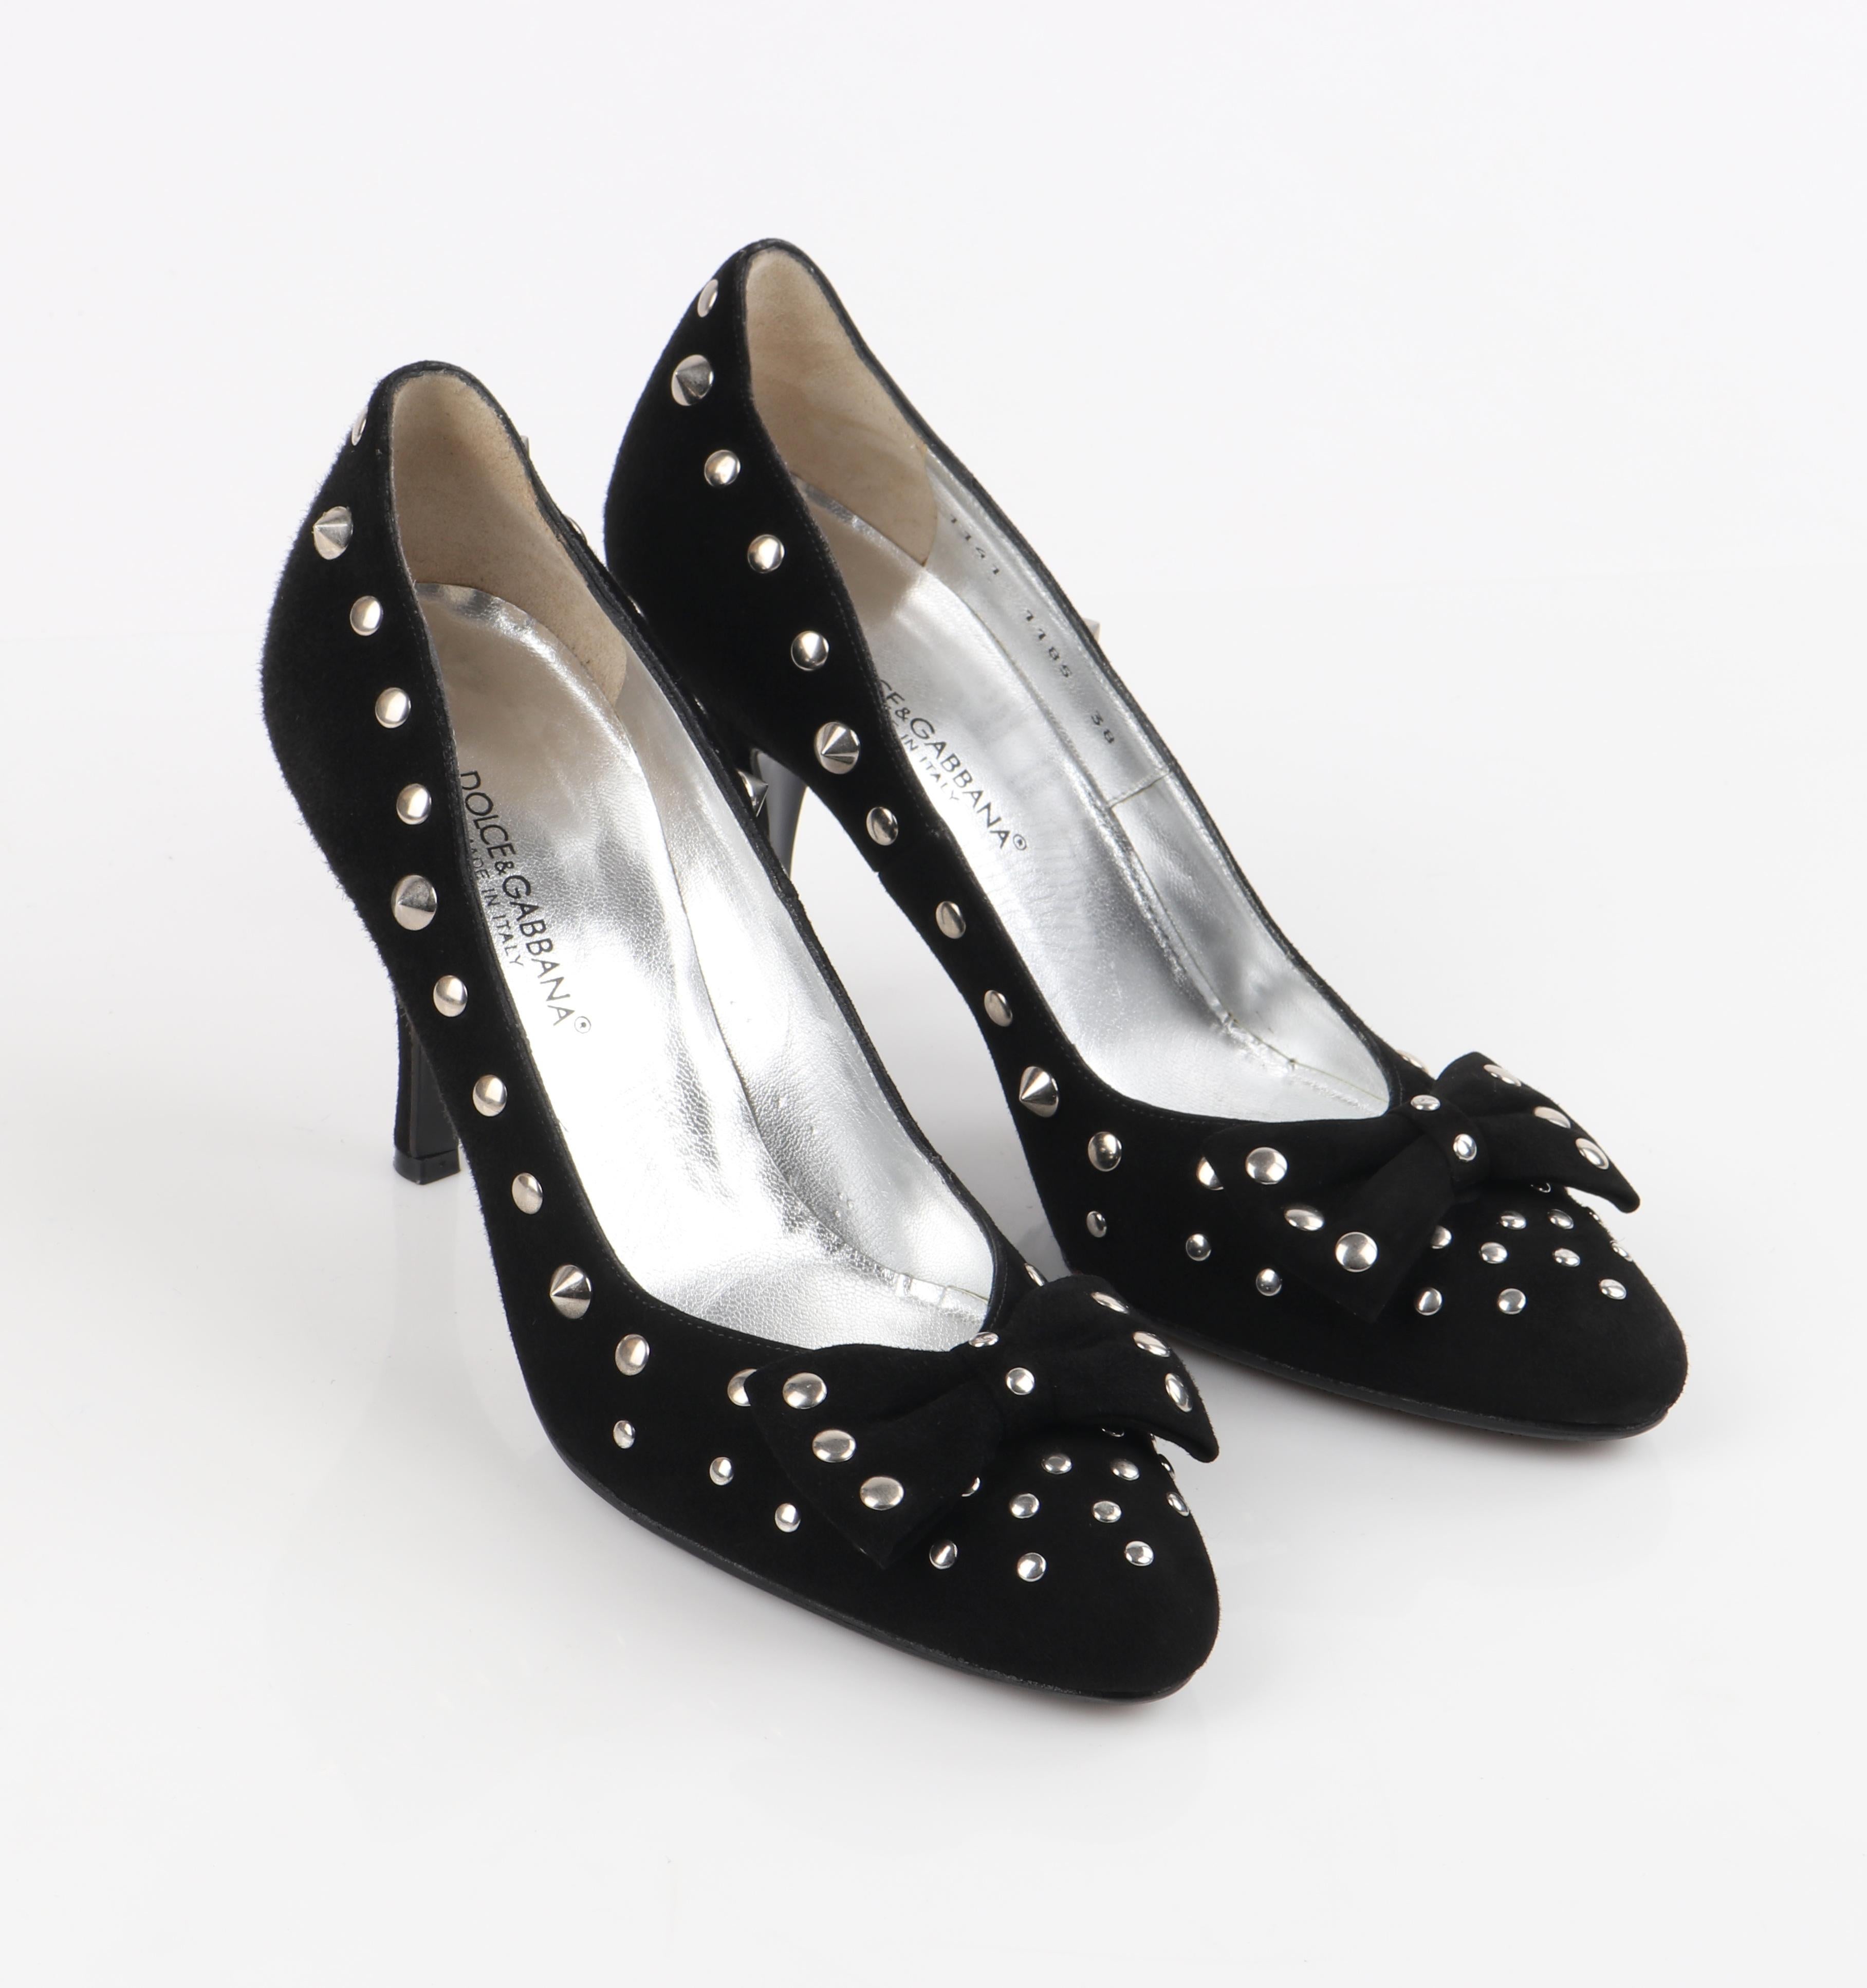 DOLCE & GABBANA Black Suede Silver Studded Vamp Bow Almond Toe Pumps Heels In Good Condition For Sale In Thiensville, WI